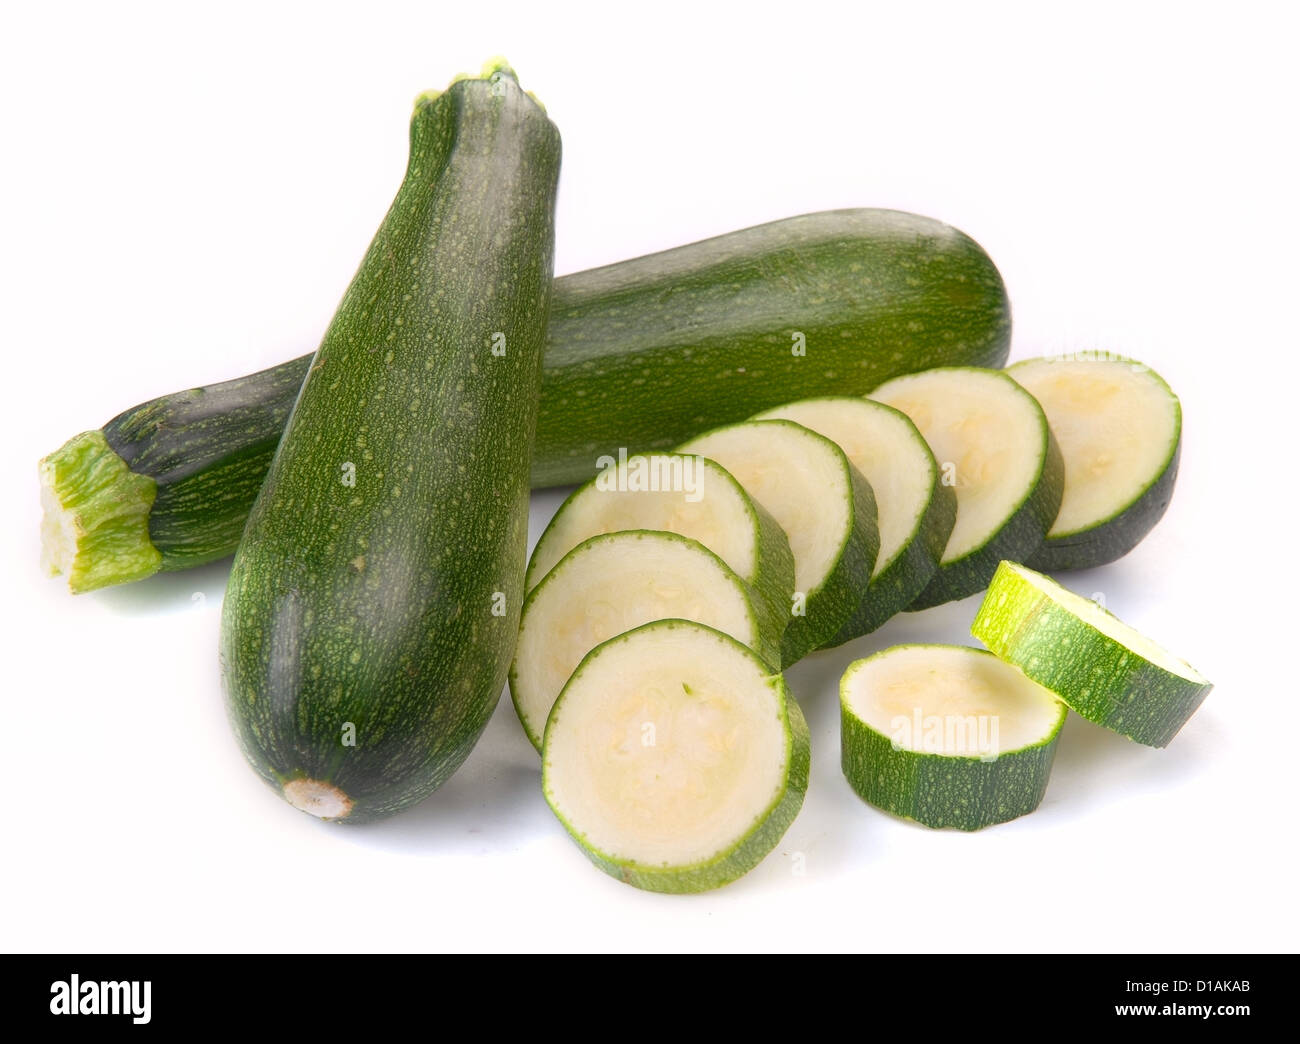 courgette with slices on a white background Stock Photo